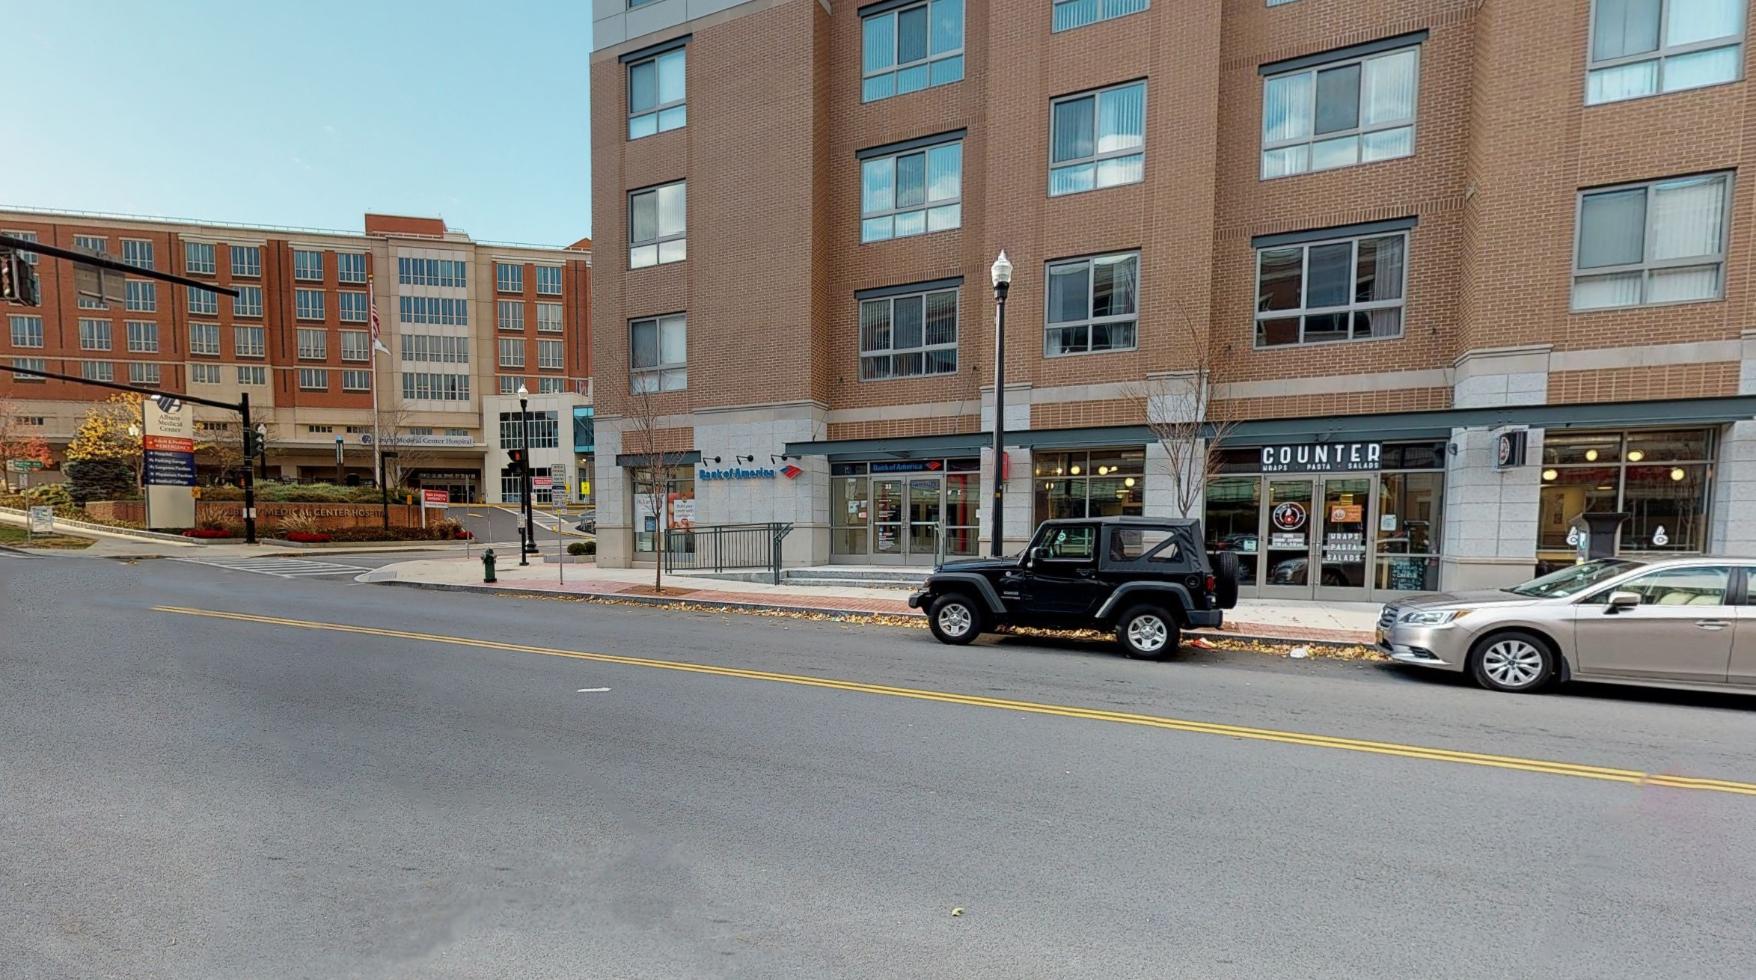 Bank of America financial center with walk-up ATM | 33 New Scotland Ave STE 100, Albany, NY 12208